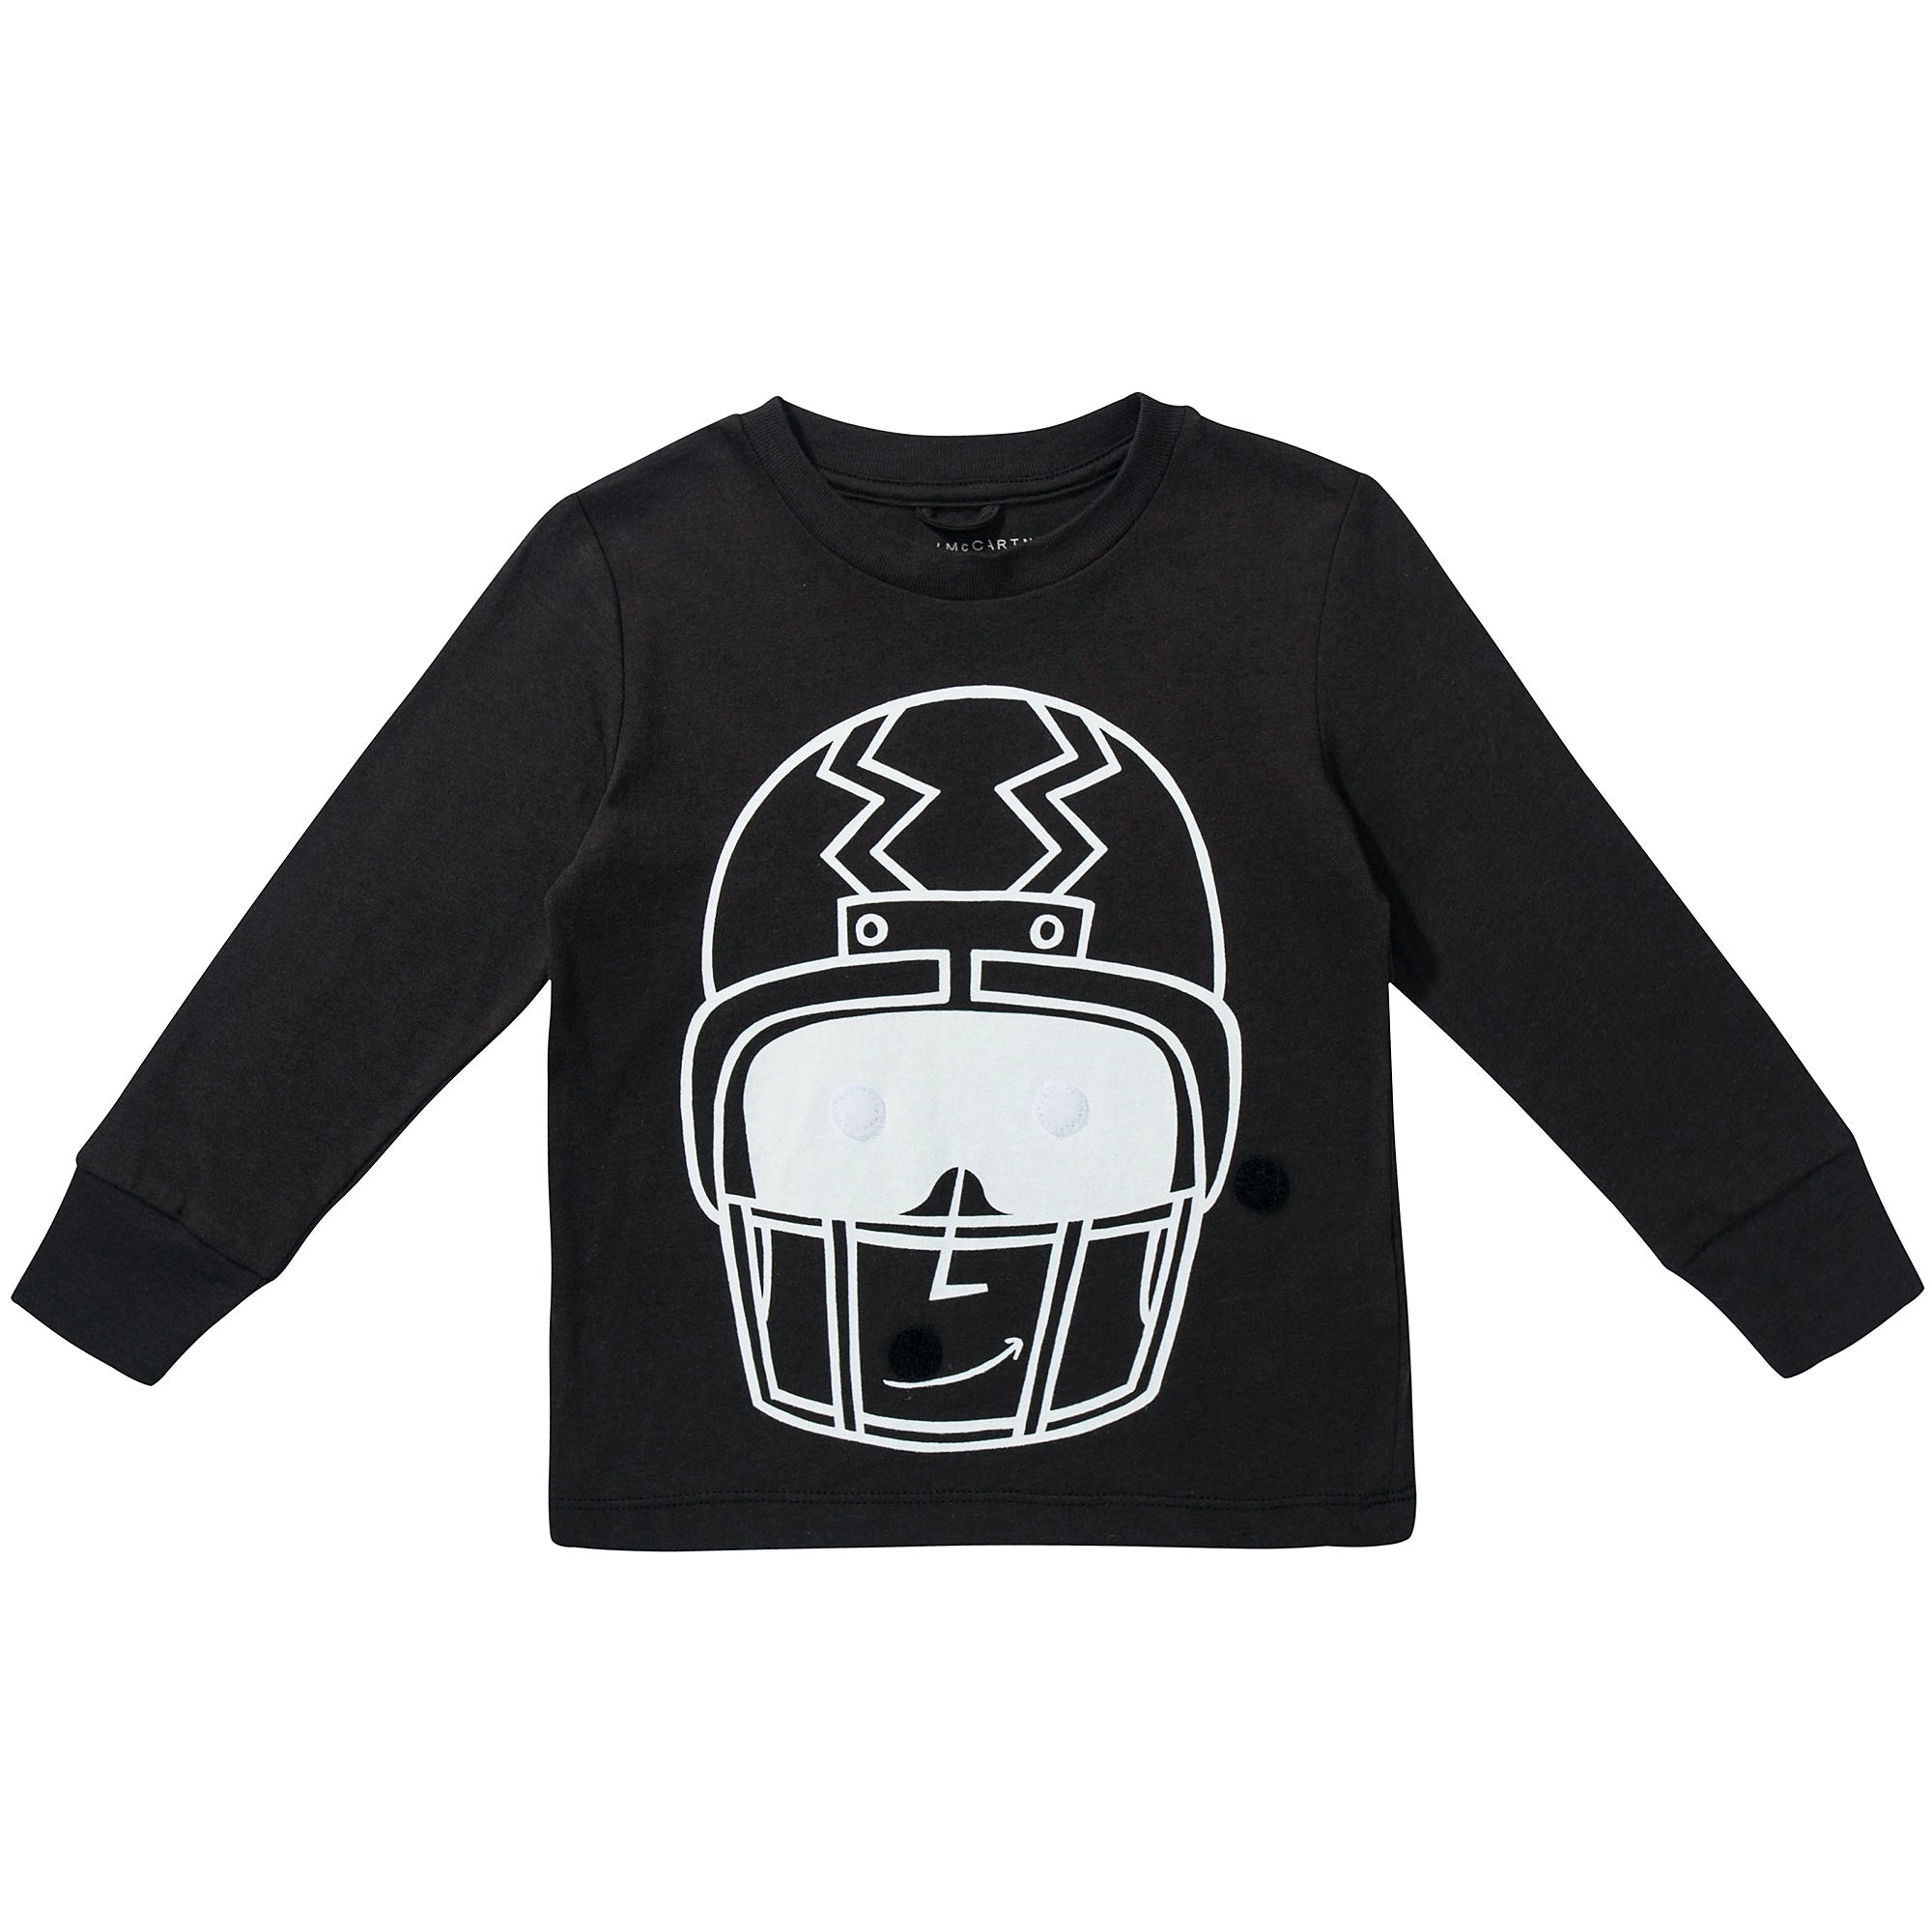 Boys Black with Patches Cotton T-shirt